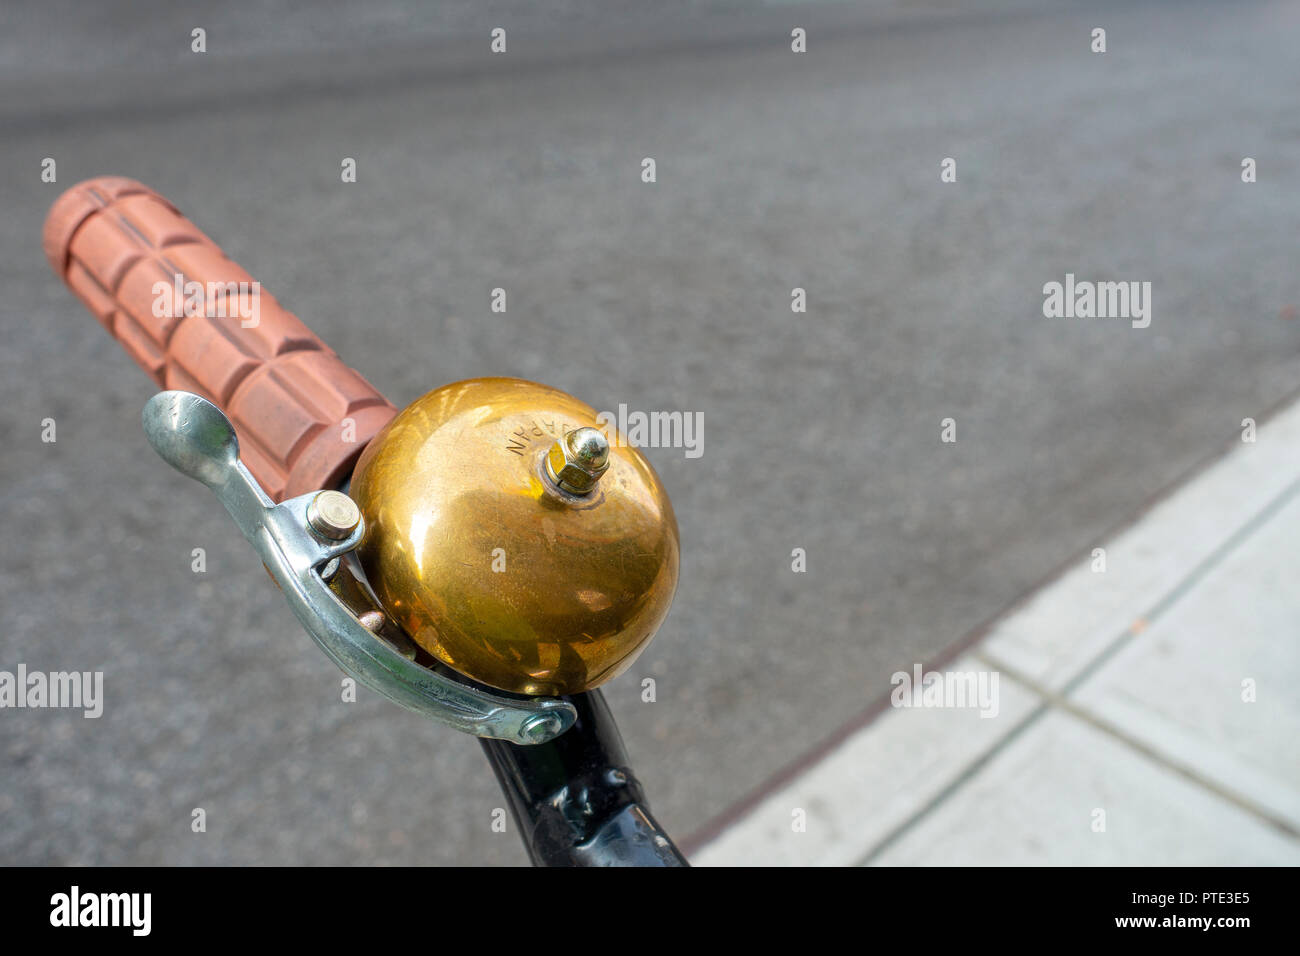 copper bronze bell on the handle bards of a parked bicycle Stock Photo